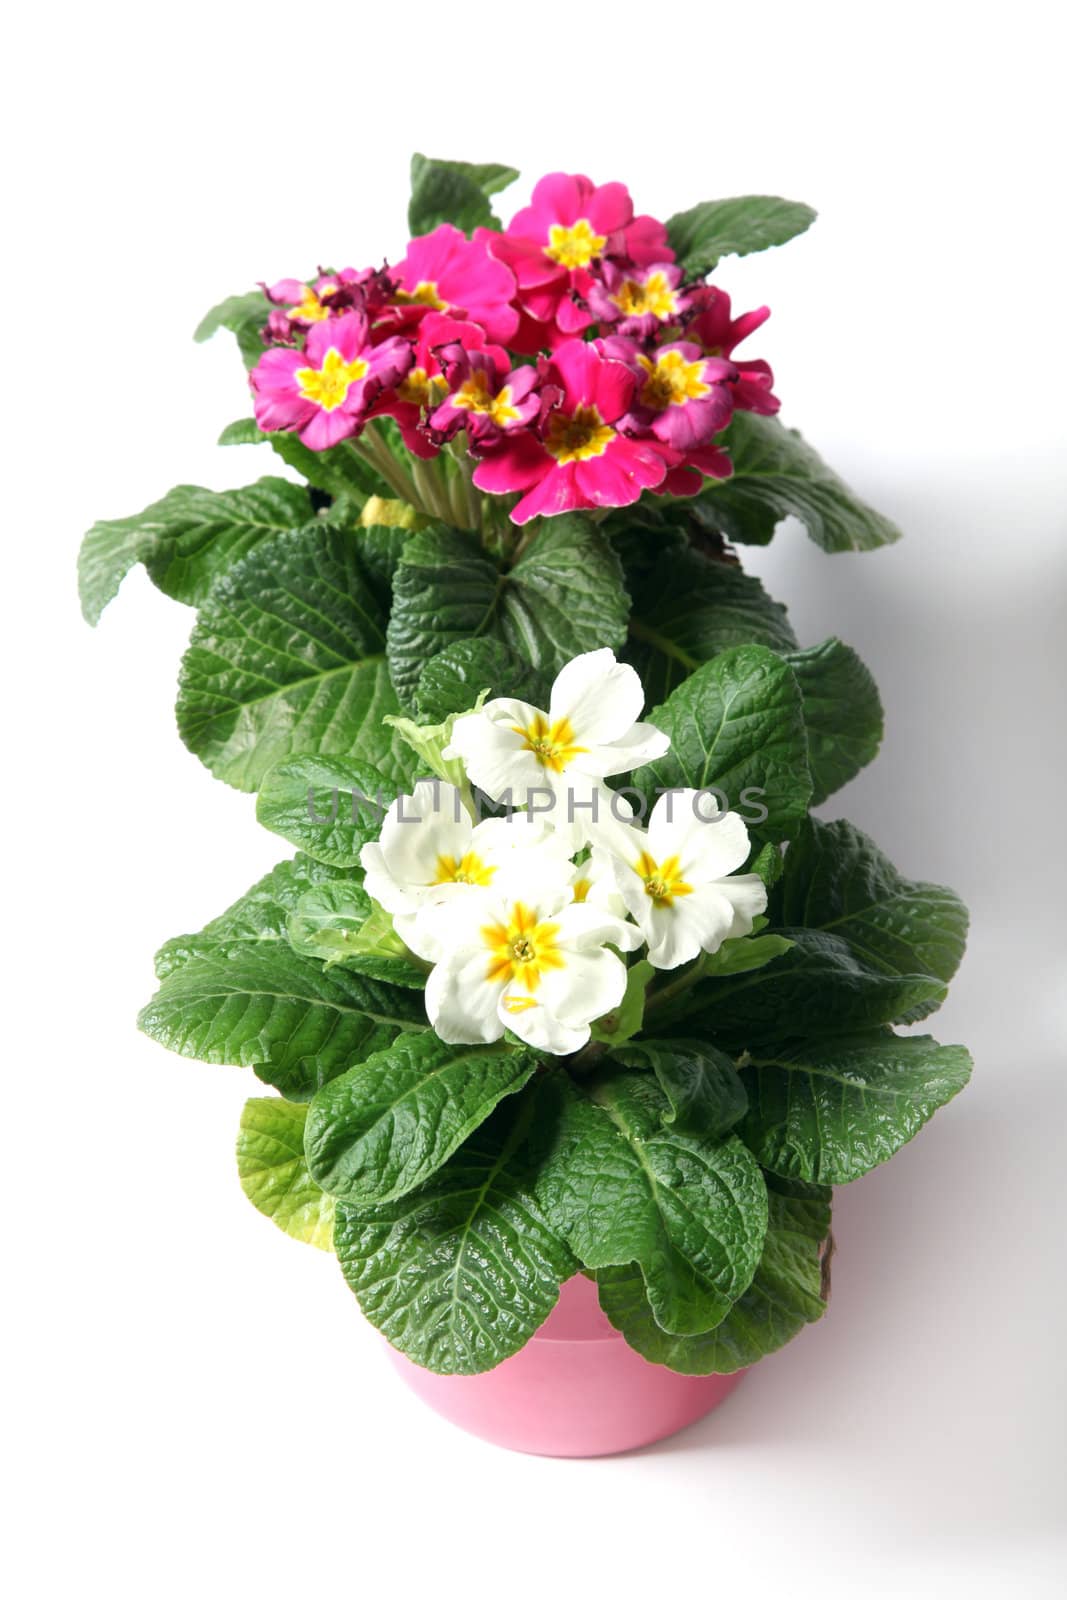 Spring primroses against a white background